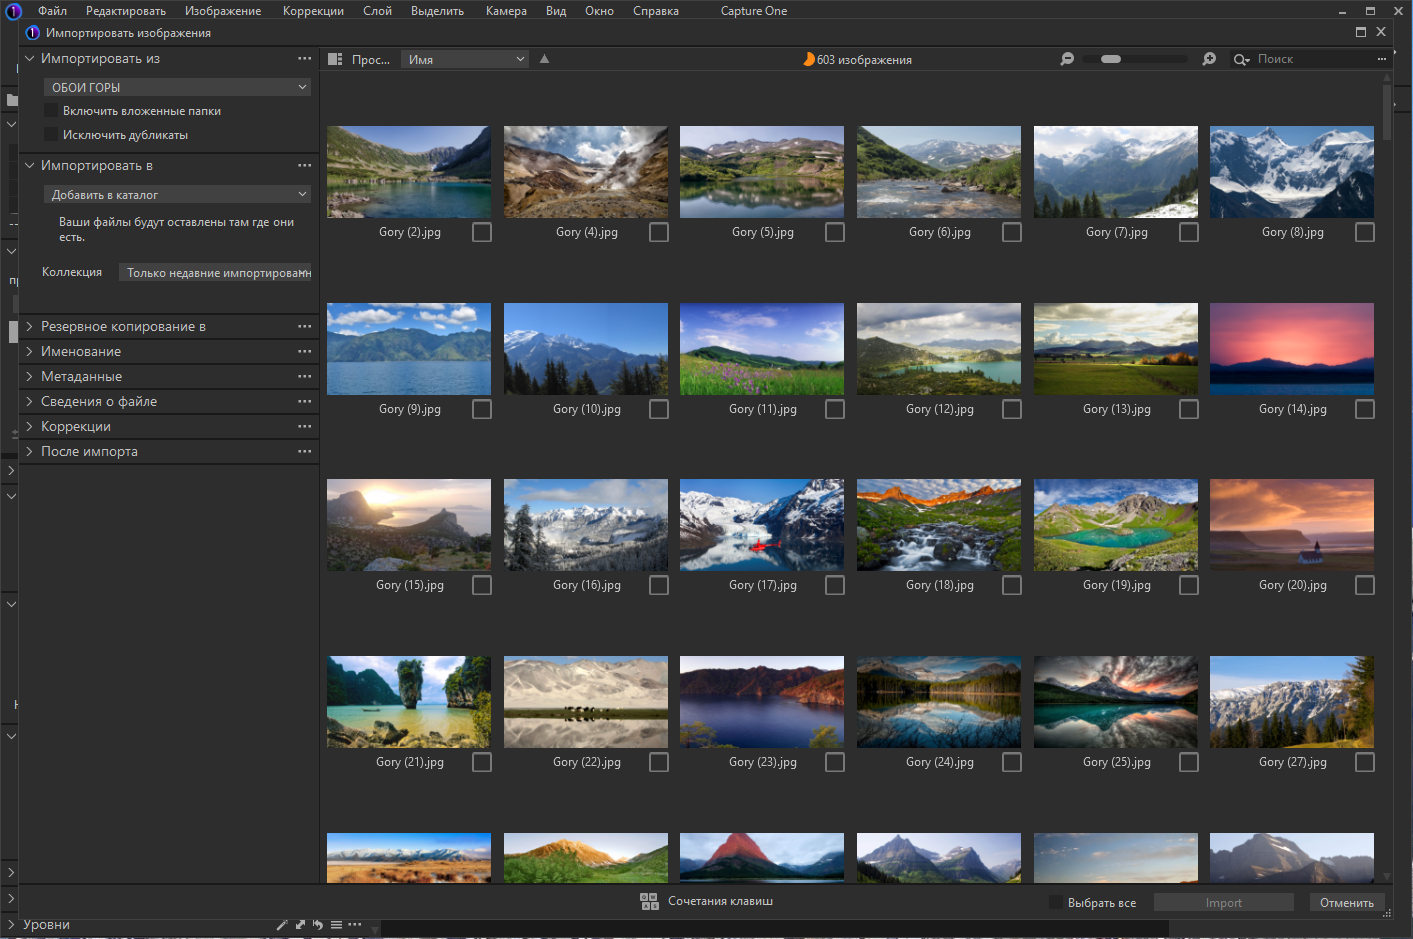 Phase One Capture One Pro 22 15.0.0.94 RePack by KpoJIuK [Multi/Ru]